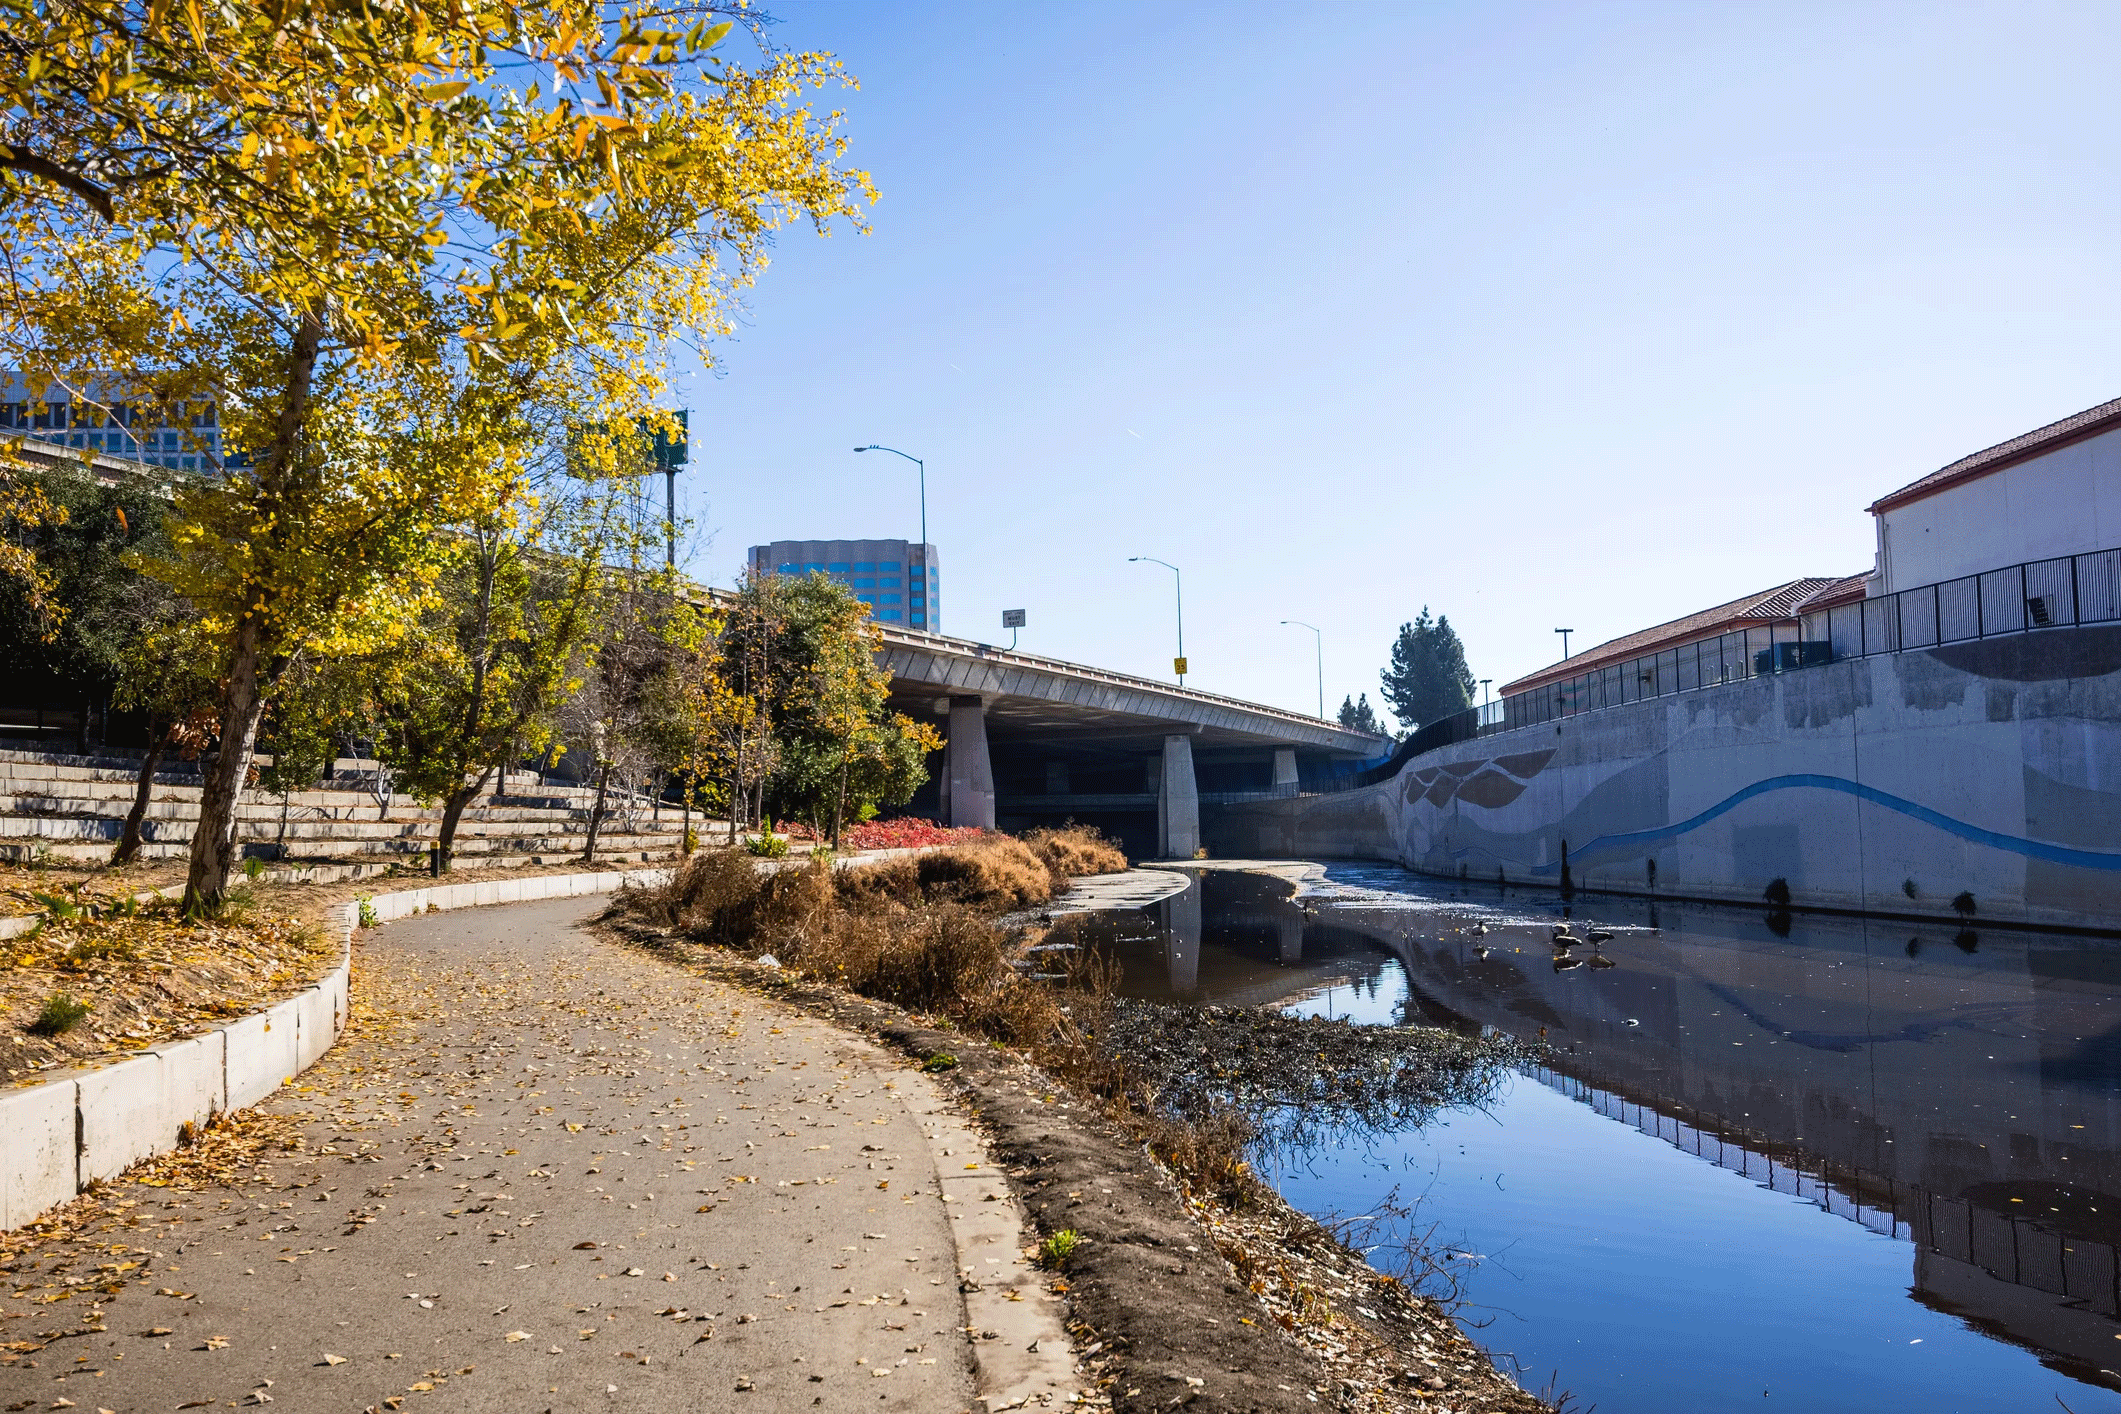 Helping urban stream corridors become more resilient and equitable is among the UC Davis projects awarded through the California Climate Action grants. (Getty)